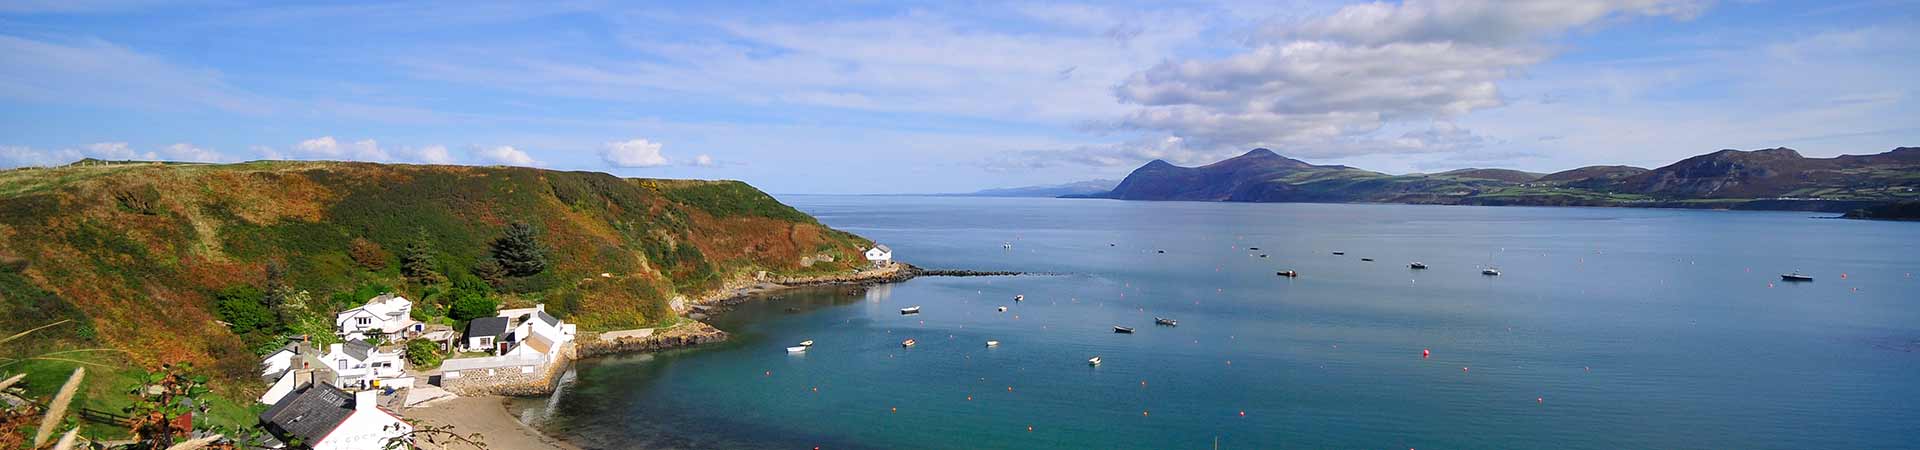 Holiday cottages in Morfa Nefyn